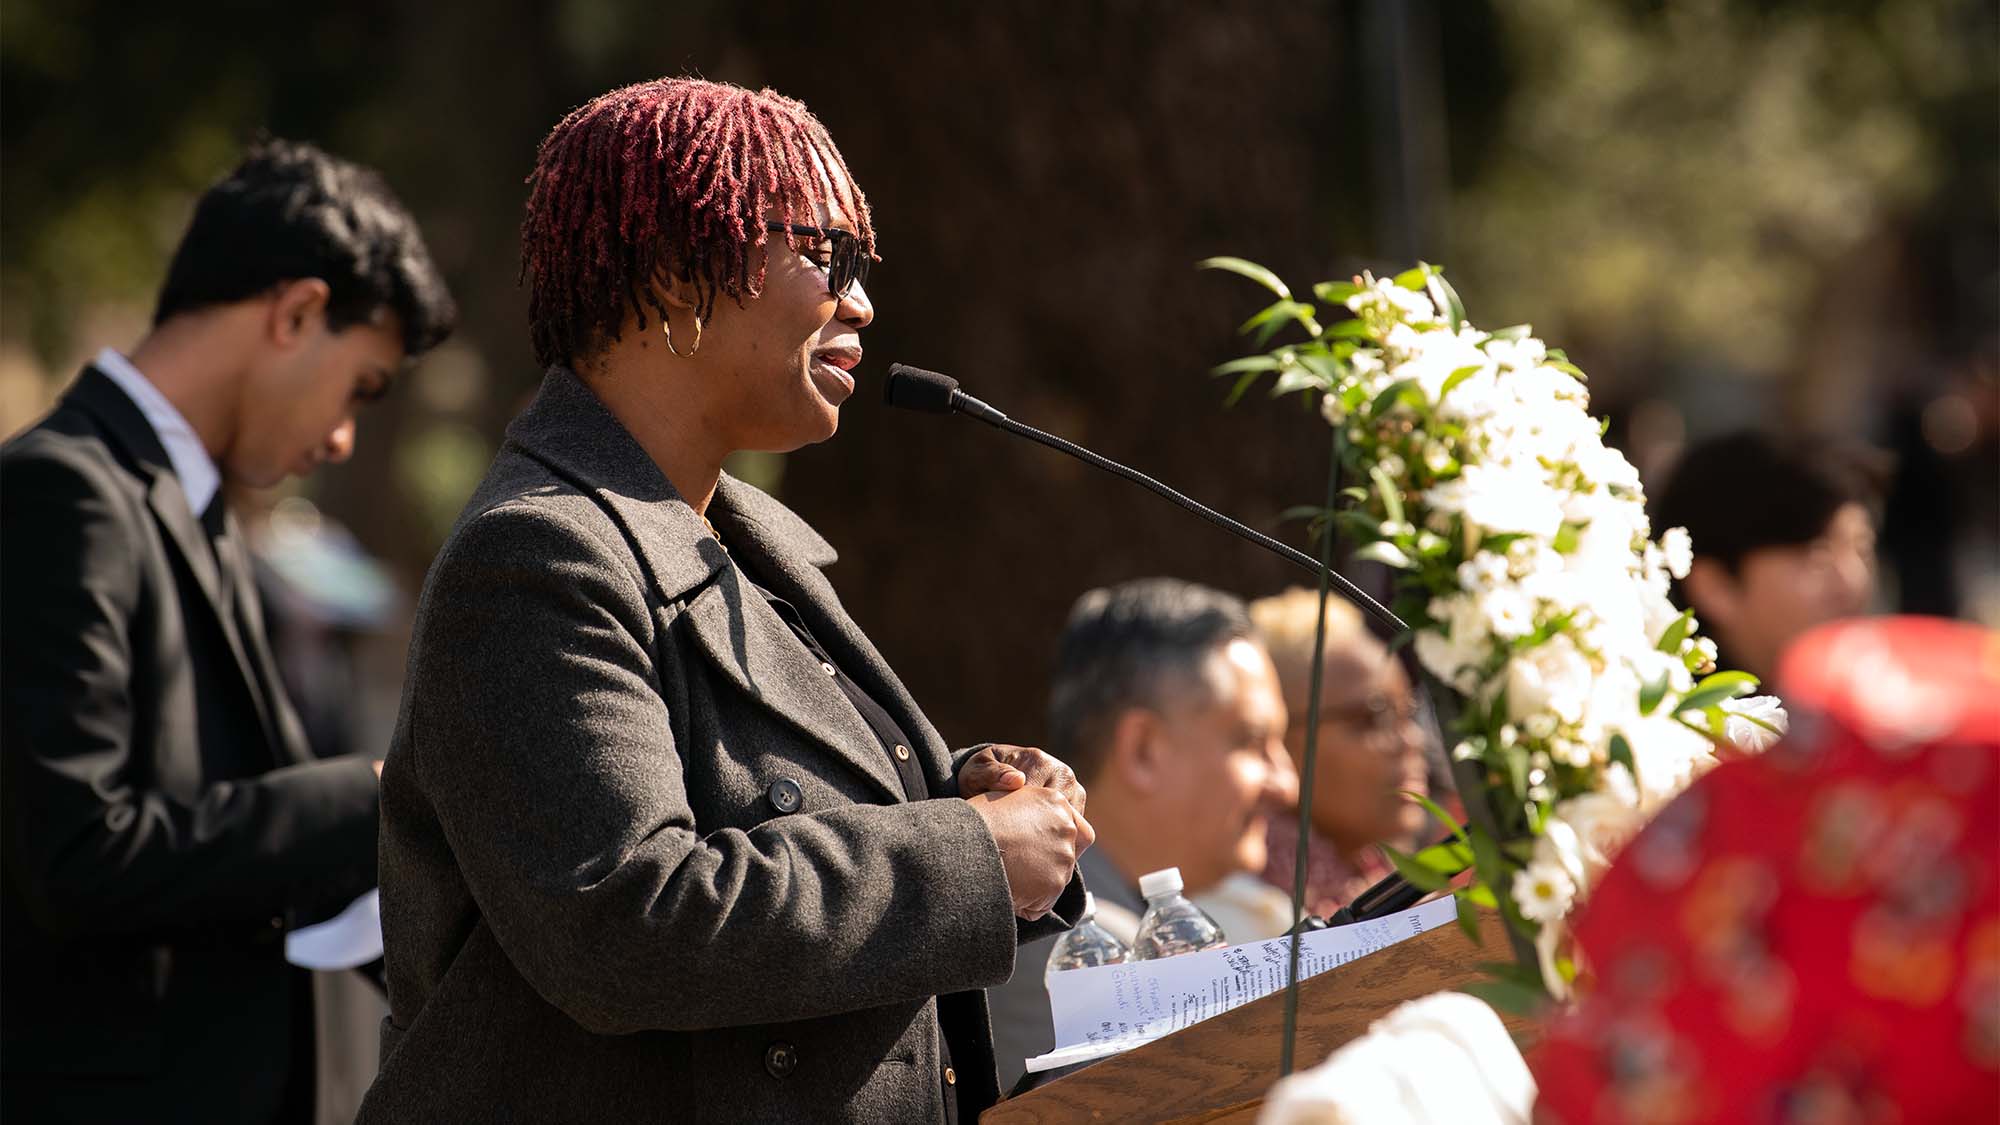 Quentisha Davis Wiles speaks at lectern, with wreath of white flowers in background.